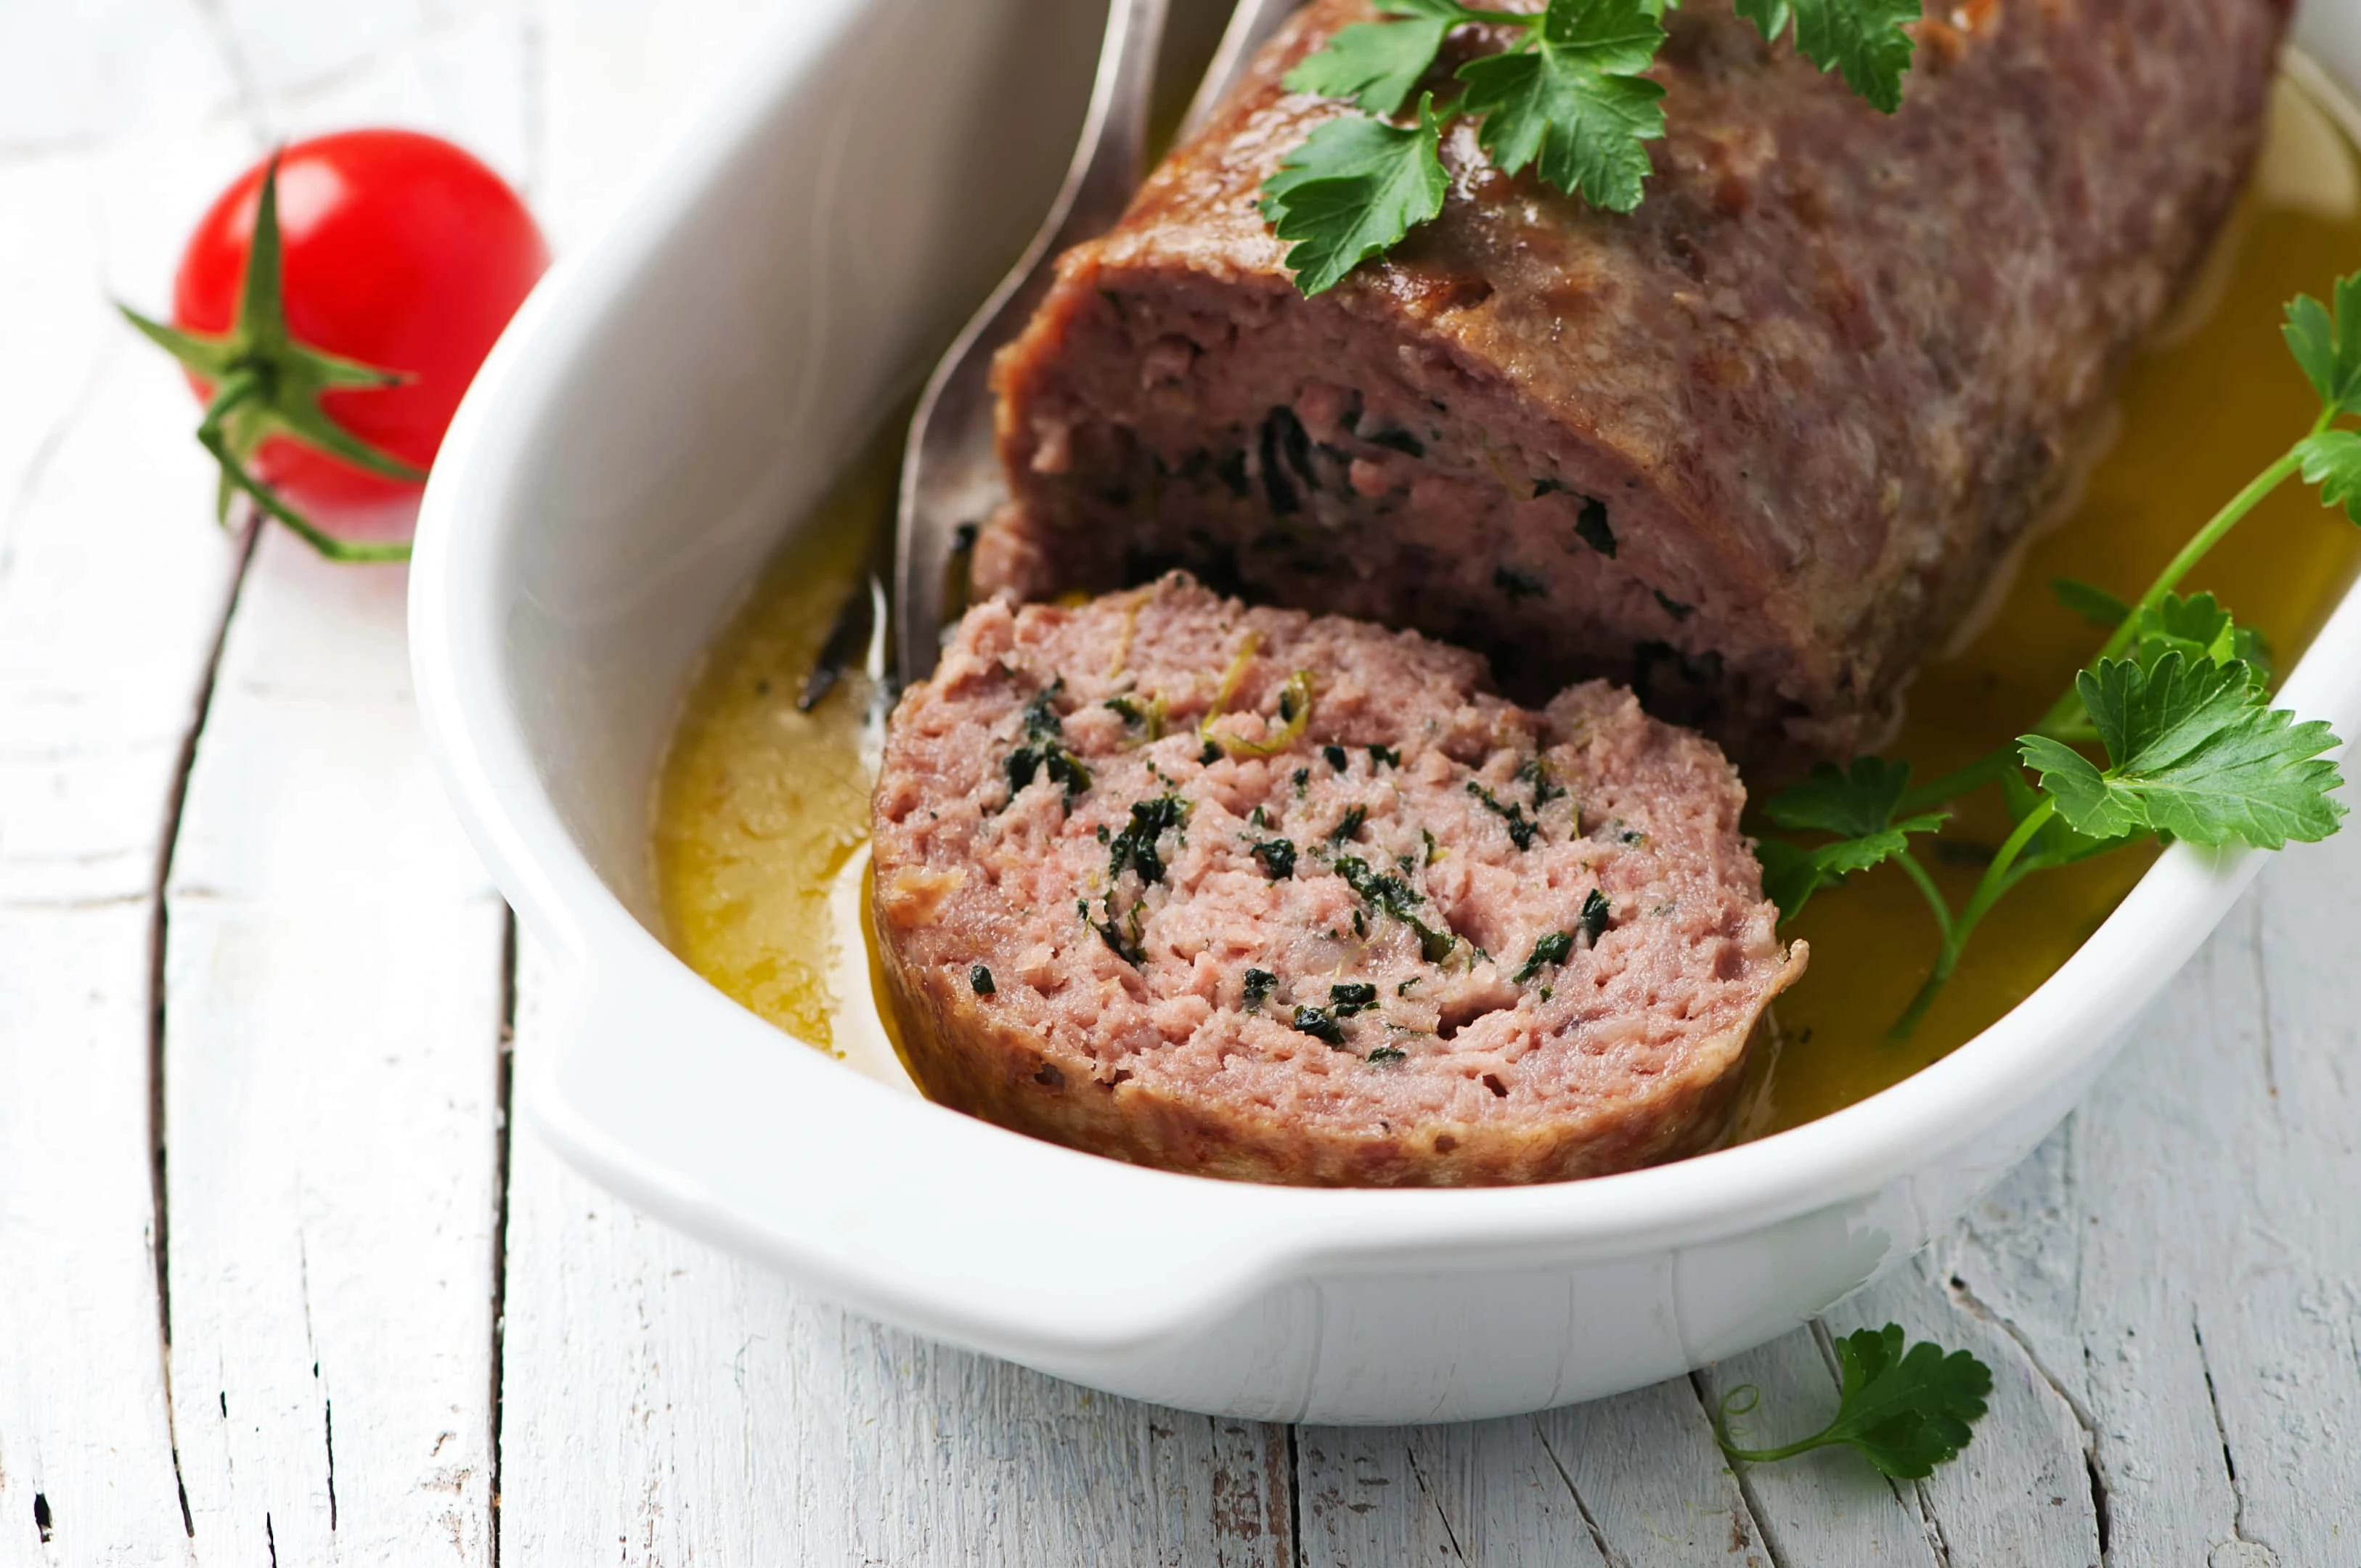 Meatloaf with herbs in ceramic plate